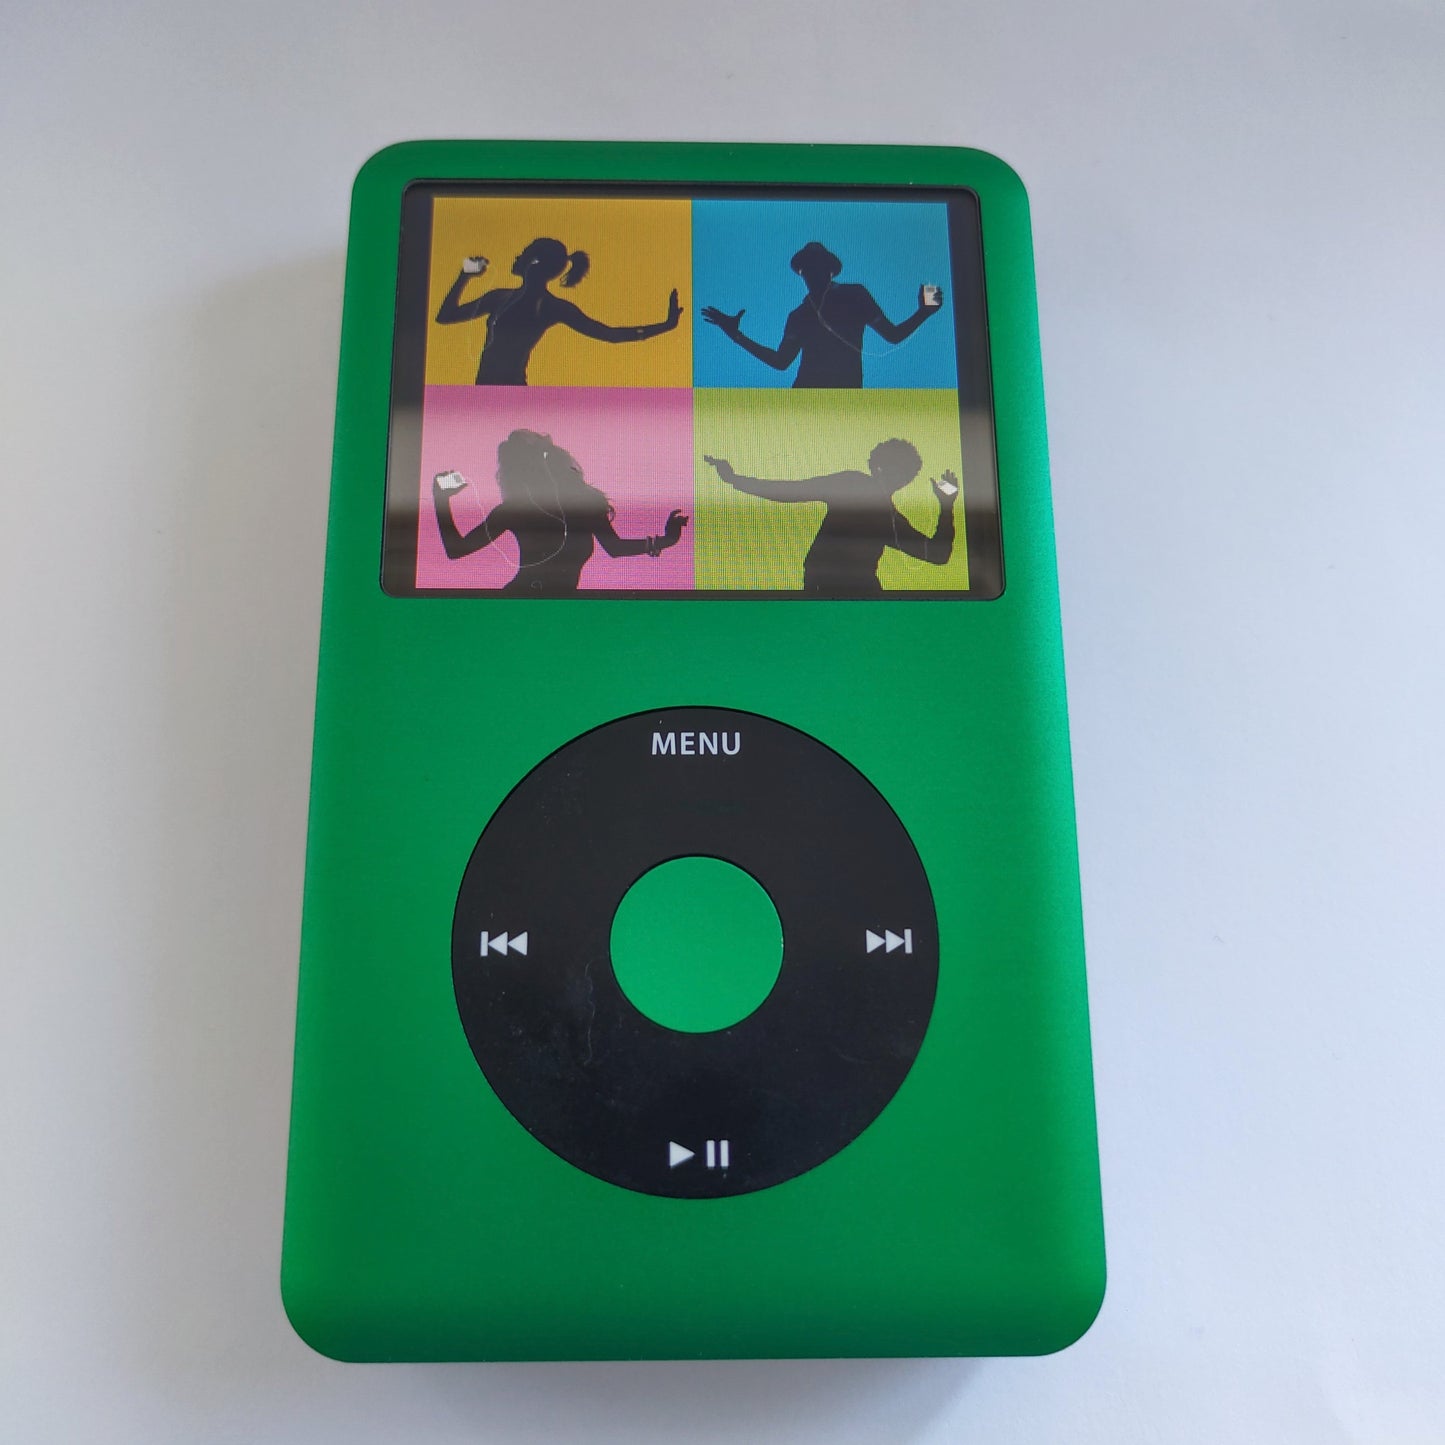 Green iPod classic top down view